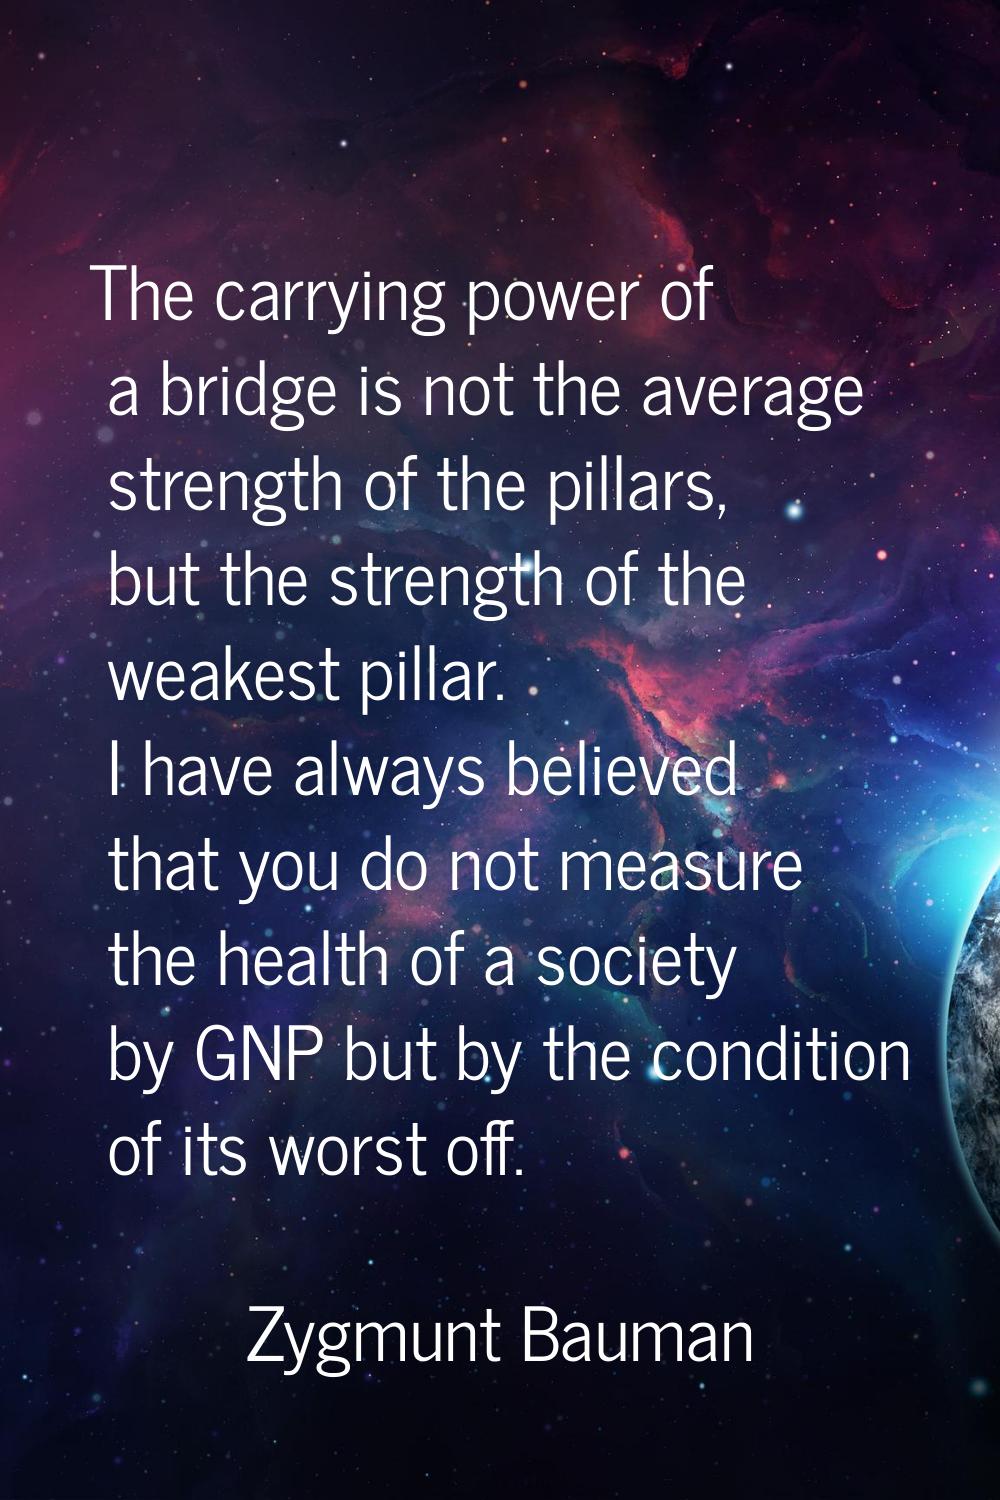 The carrying power of a bridge is not the average strength of the pillars, but the strength of the 